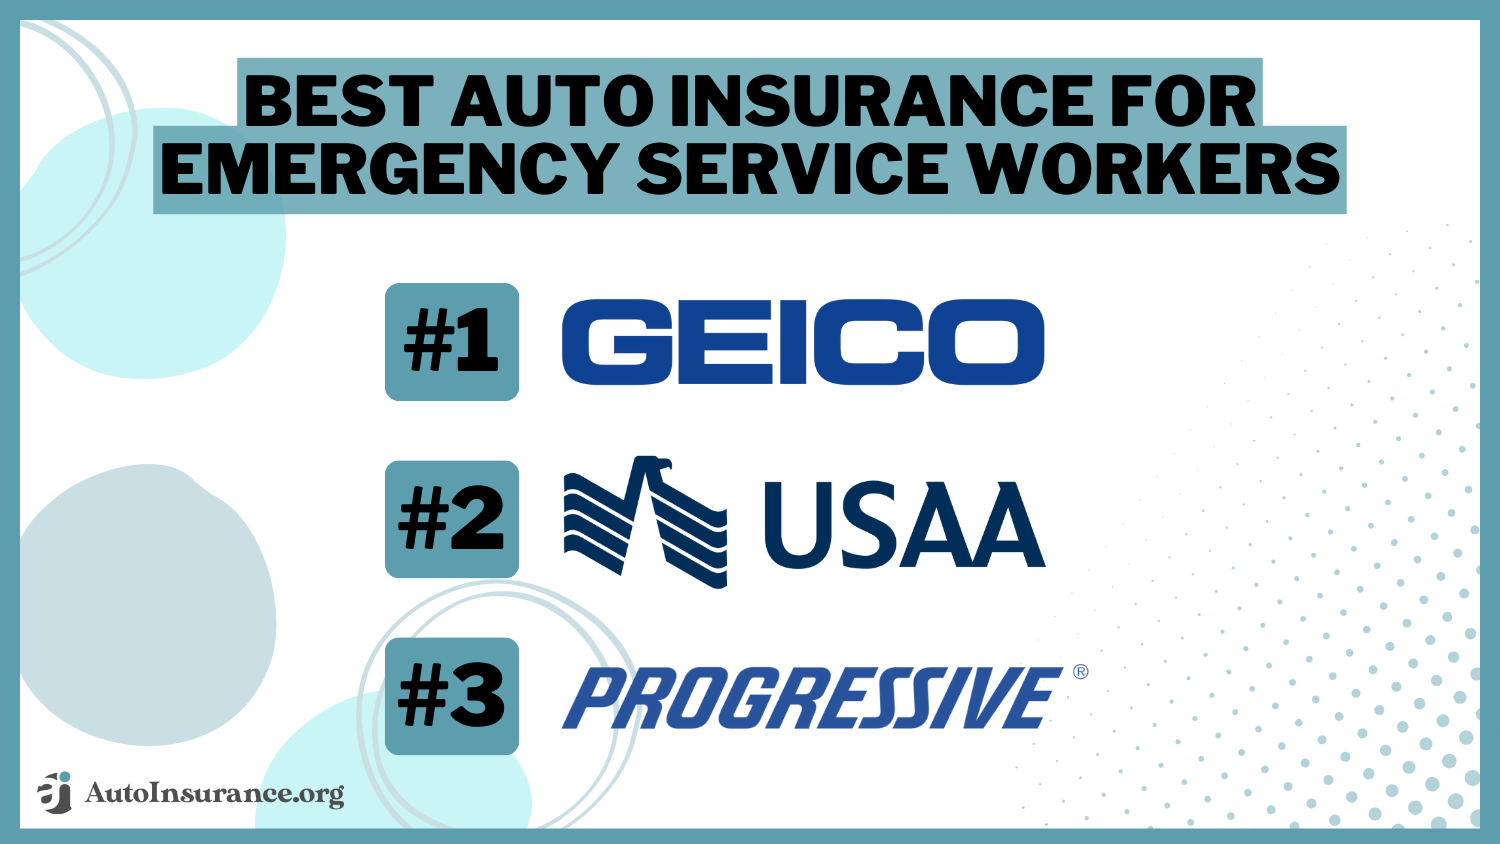 Best Auto Insurance for Emergency Service Workers